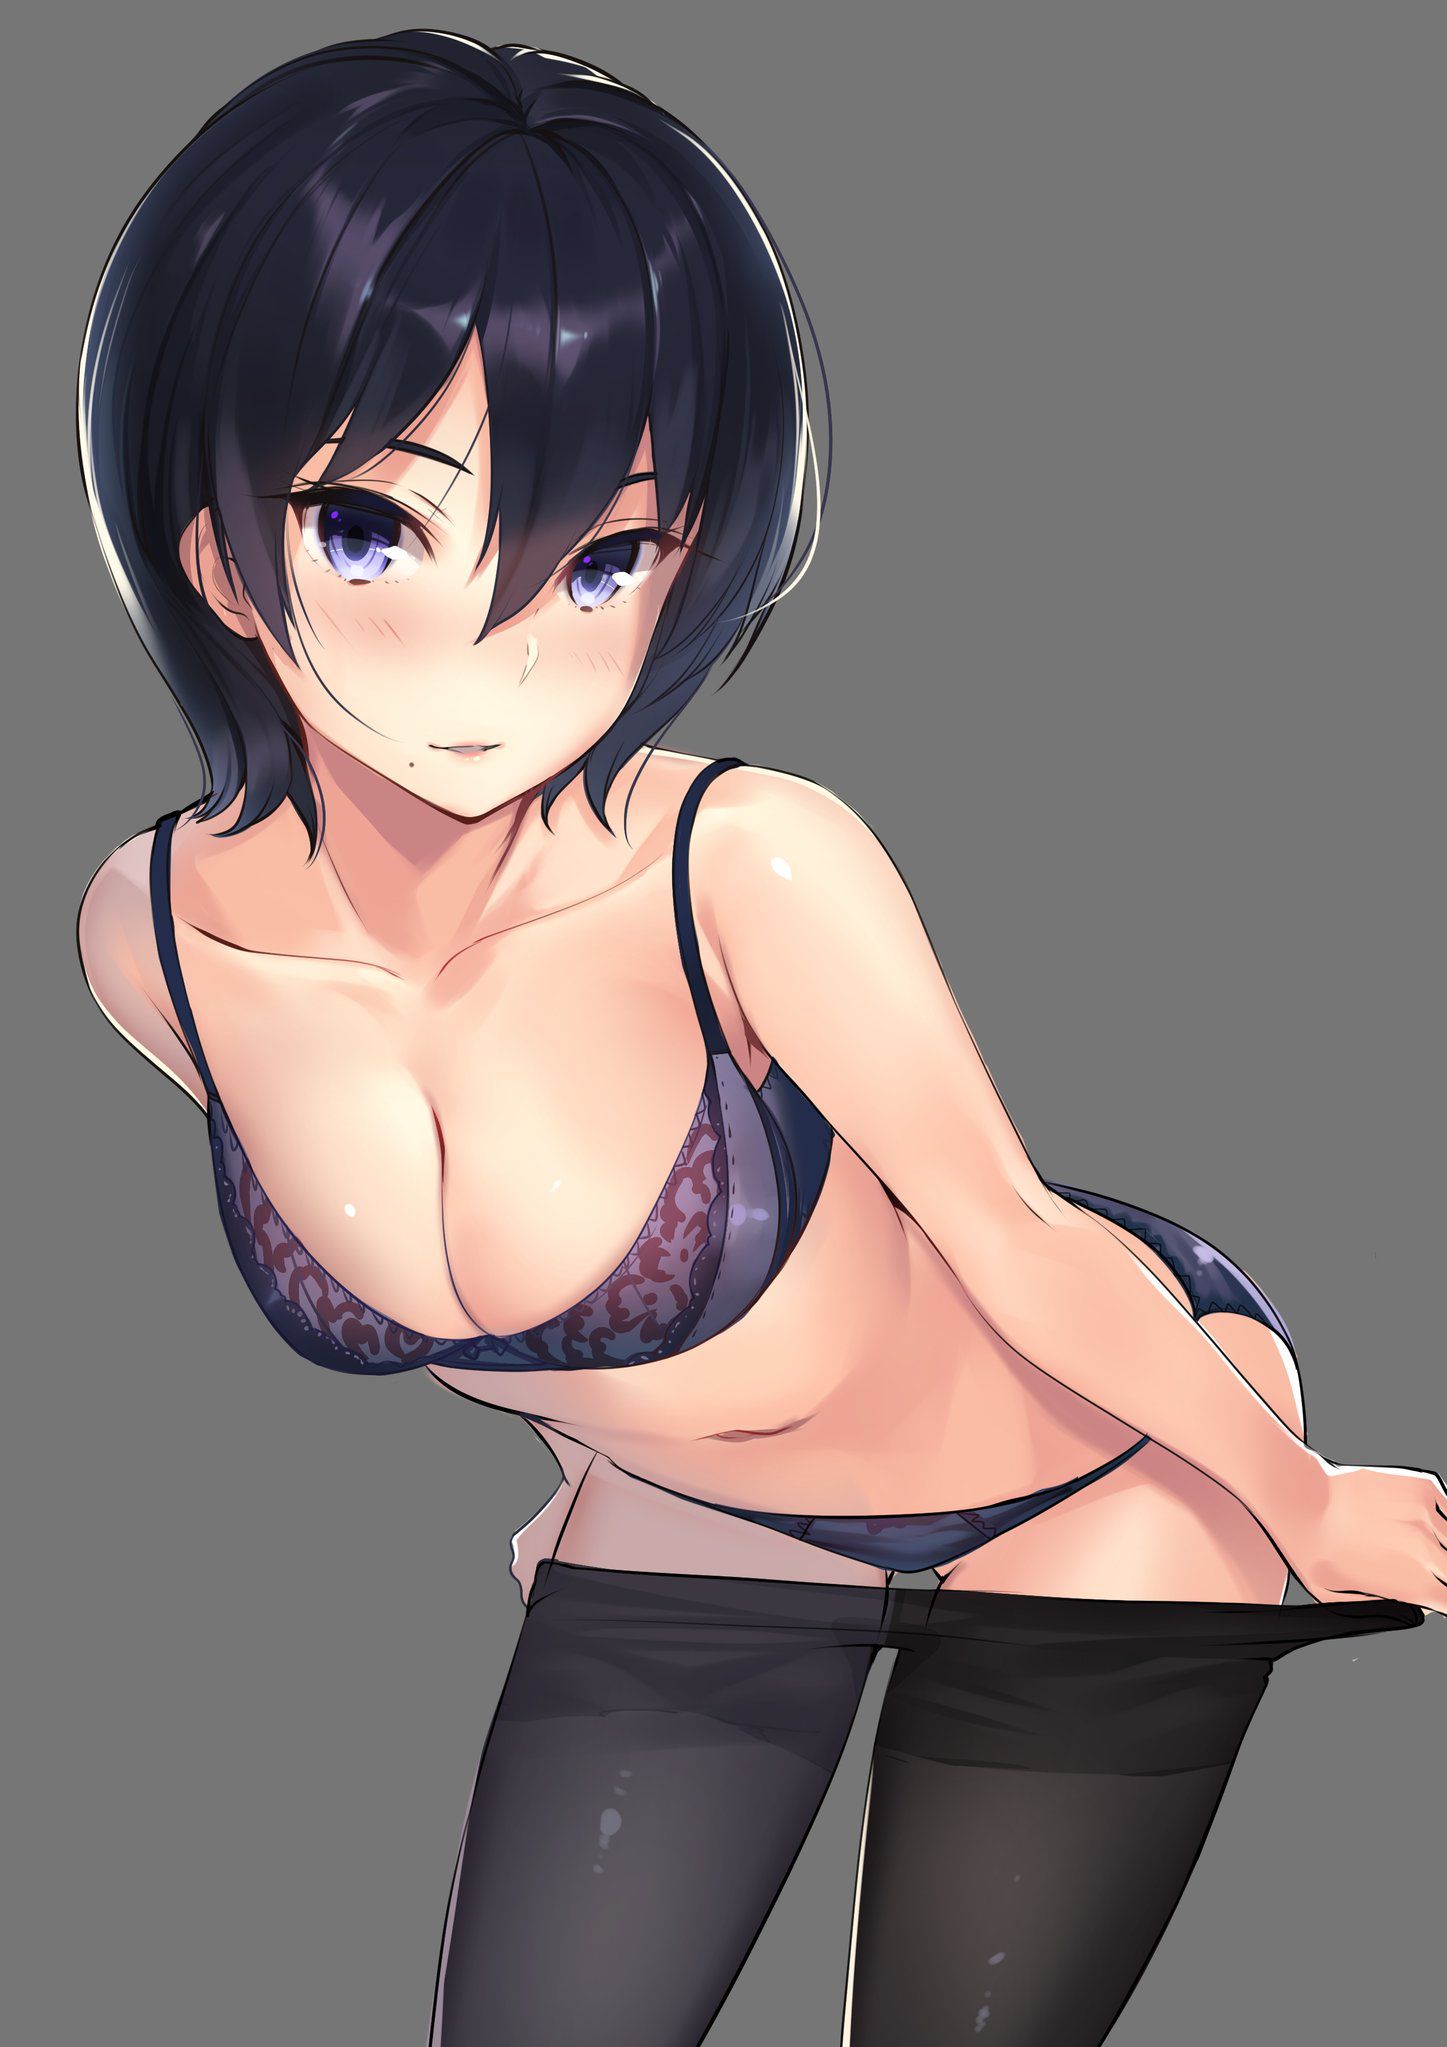 Secondary erotic image of a girl wearing black underwear that looks sexier than [secondary] that 20 [black underwear] 19